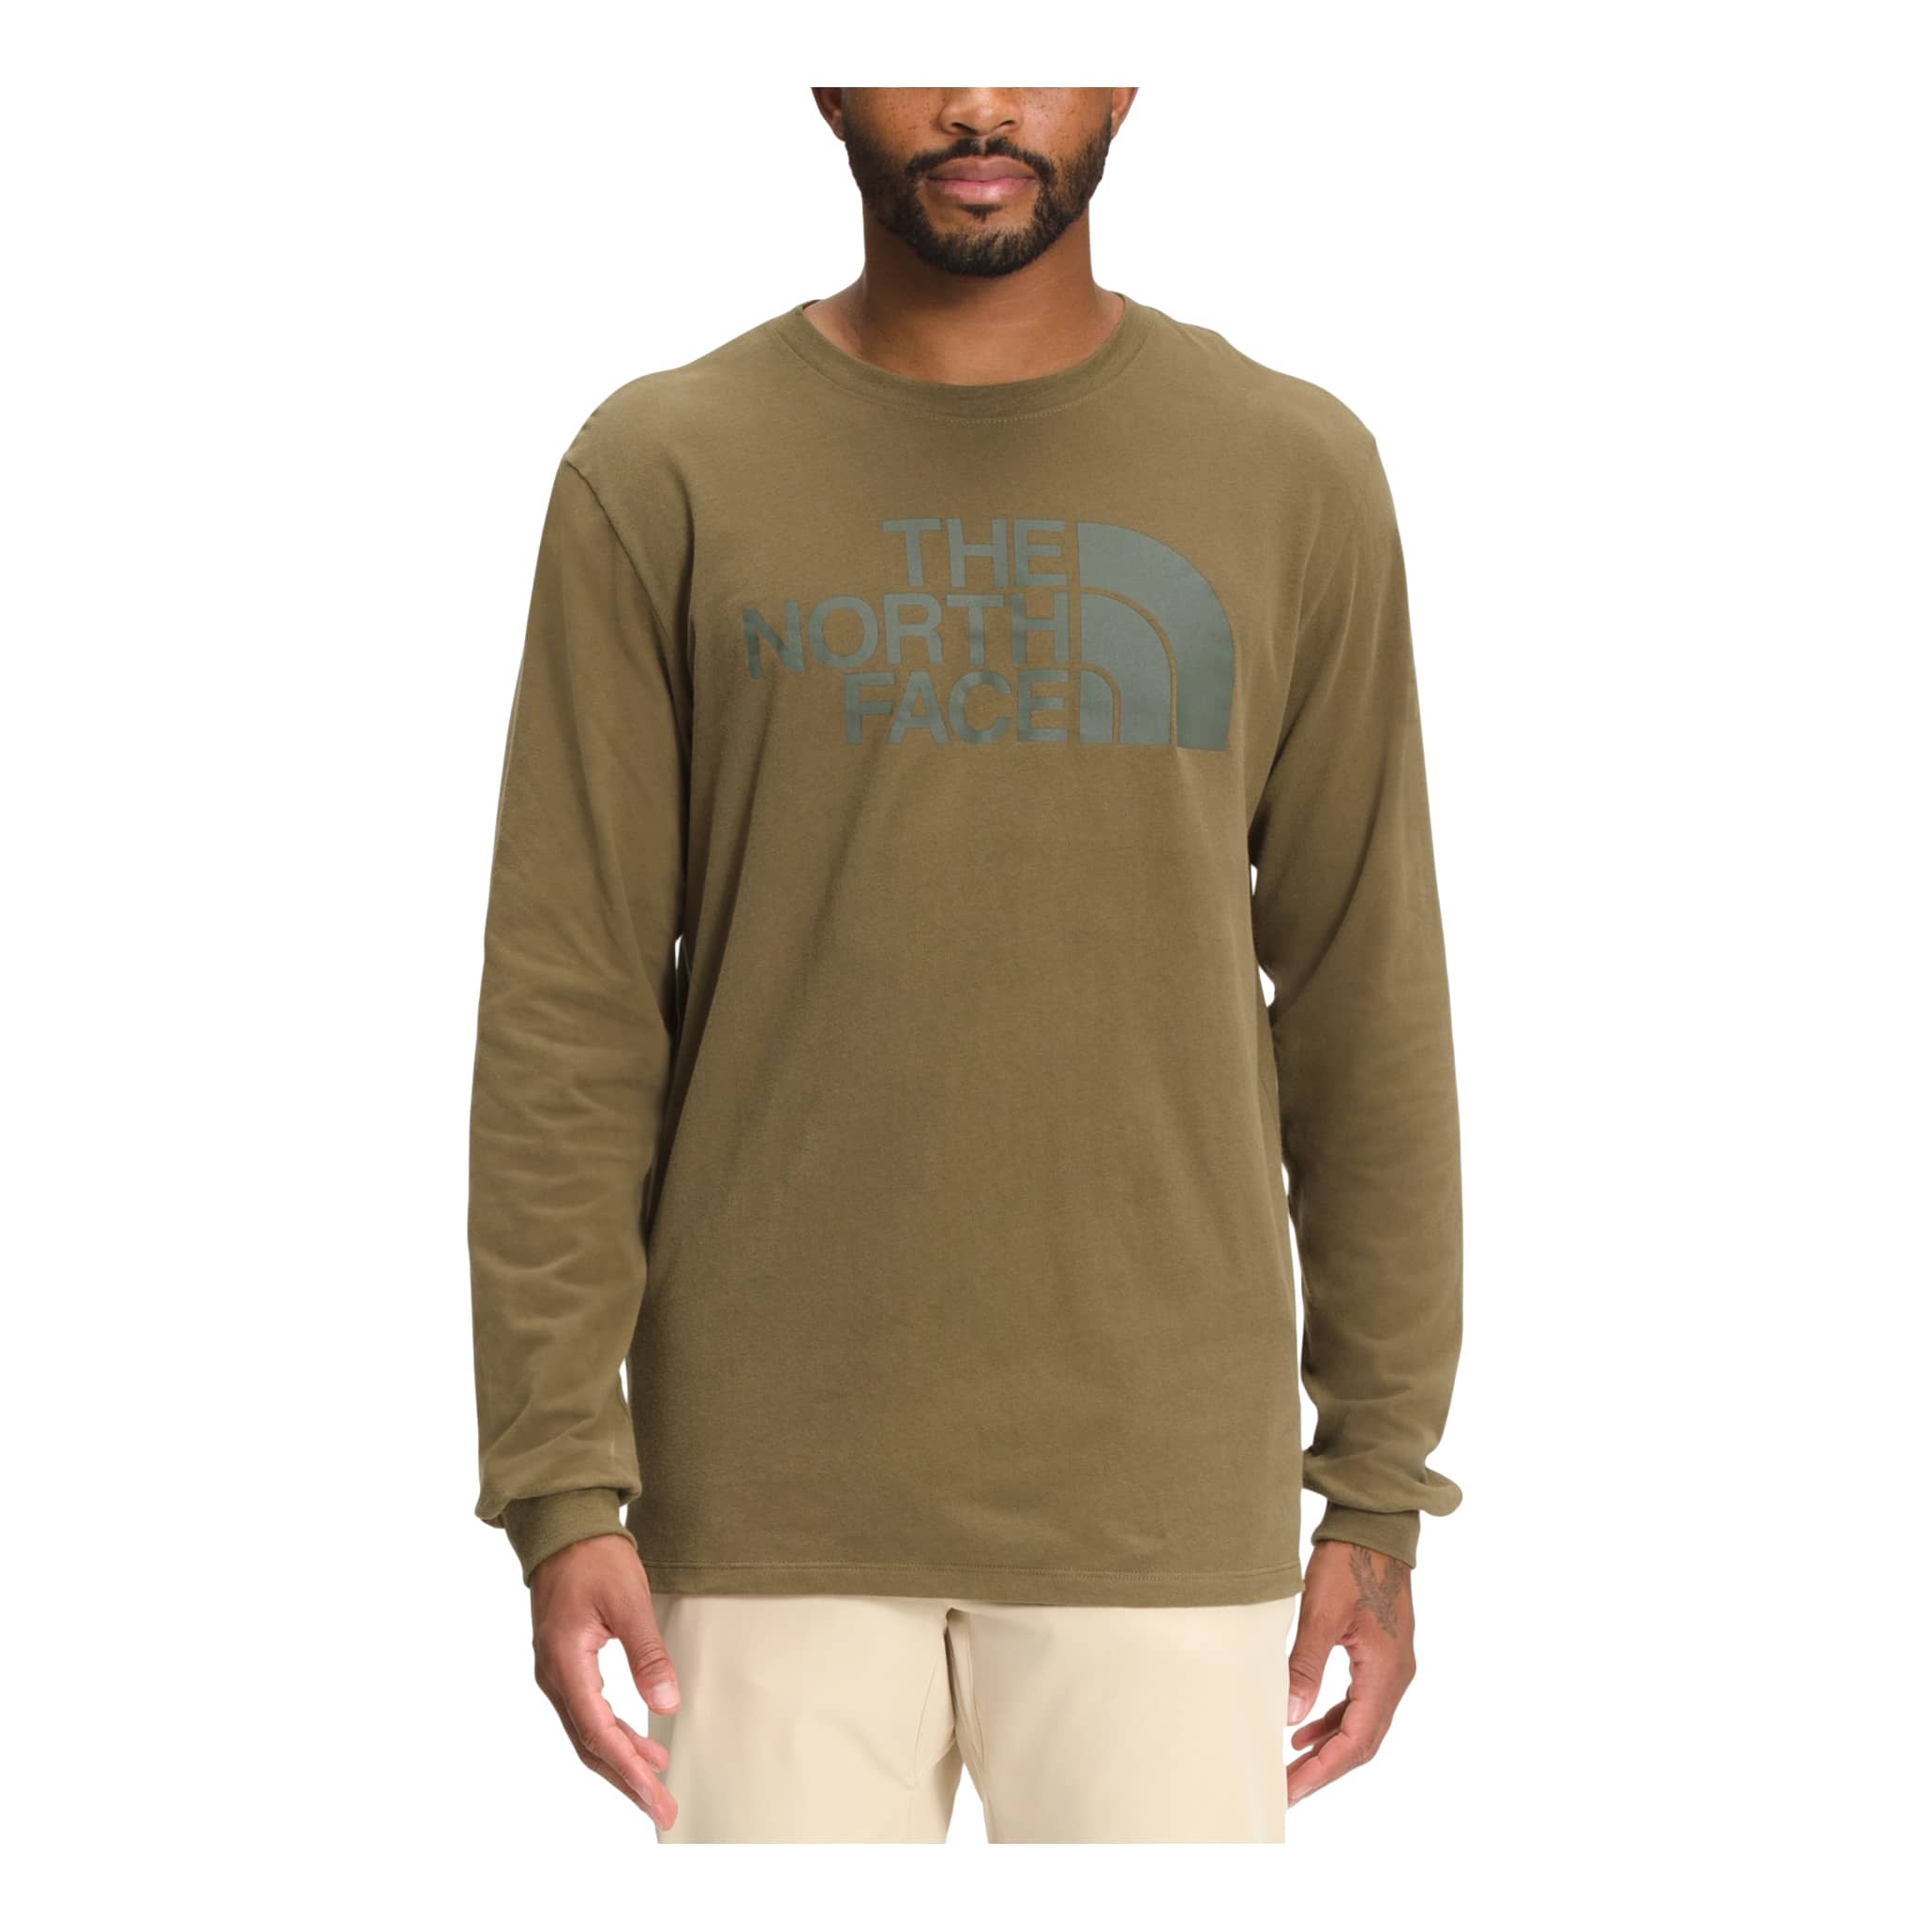 The North Face® Men’s Long Sleeve Half Dome T-Shirt - Military Olive